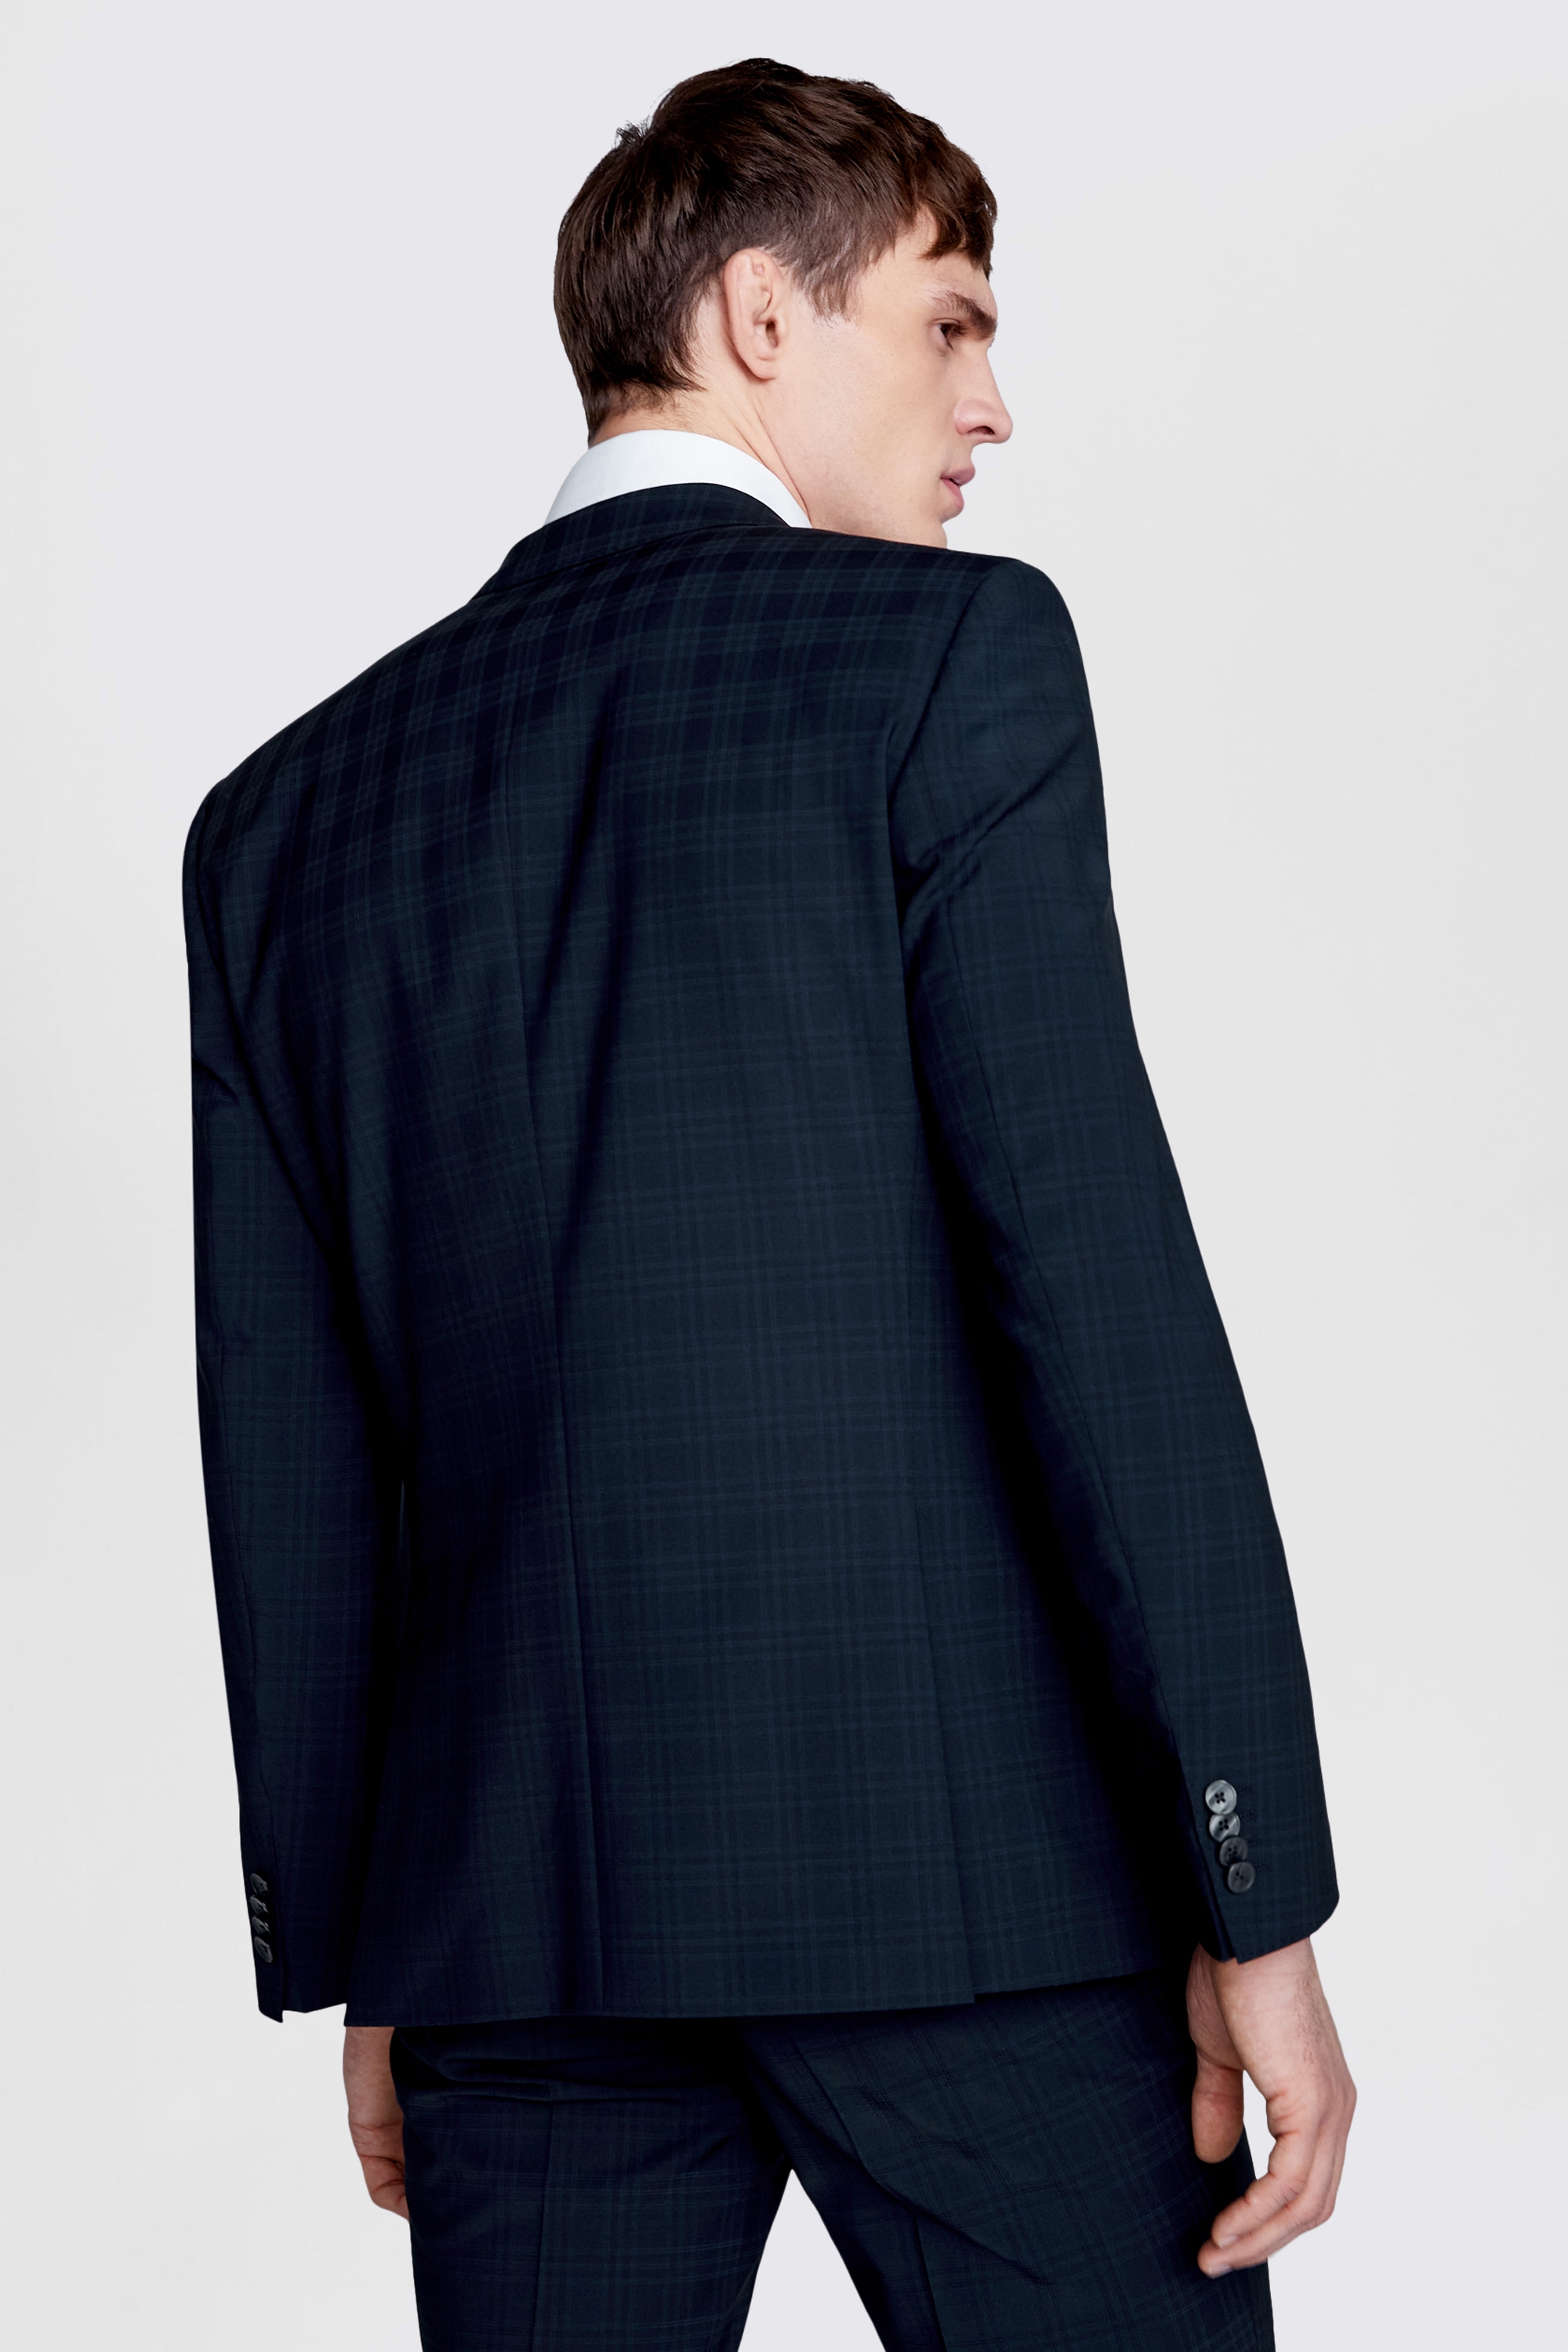 Boss Slim Fit Navy Check Jacket | Buy Online at Moss